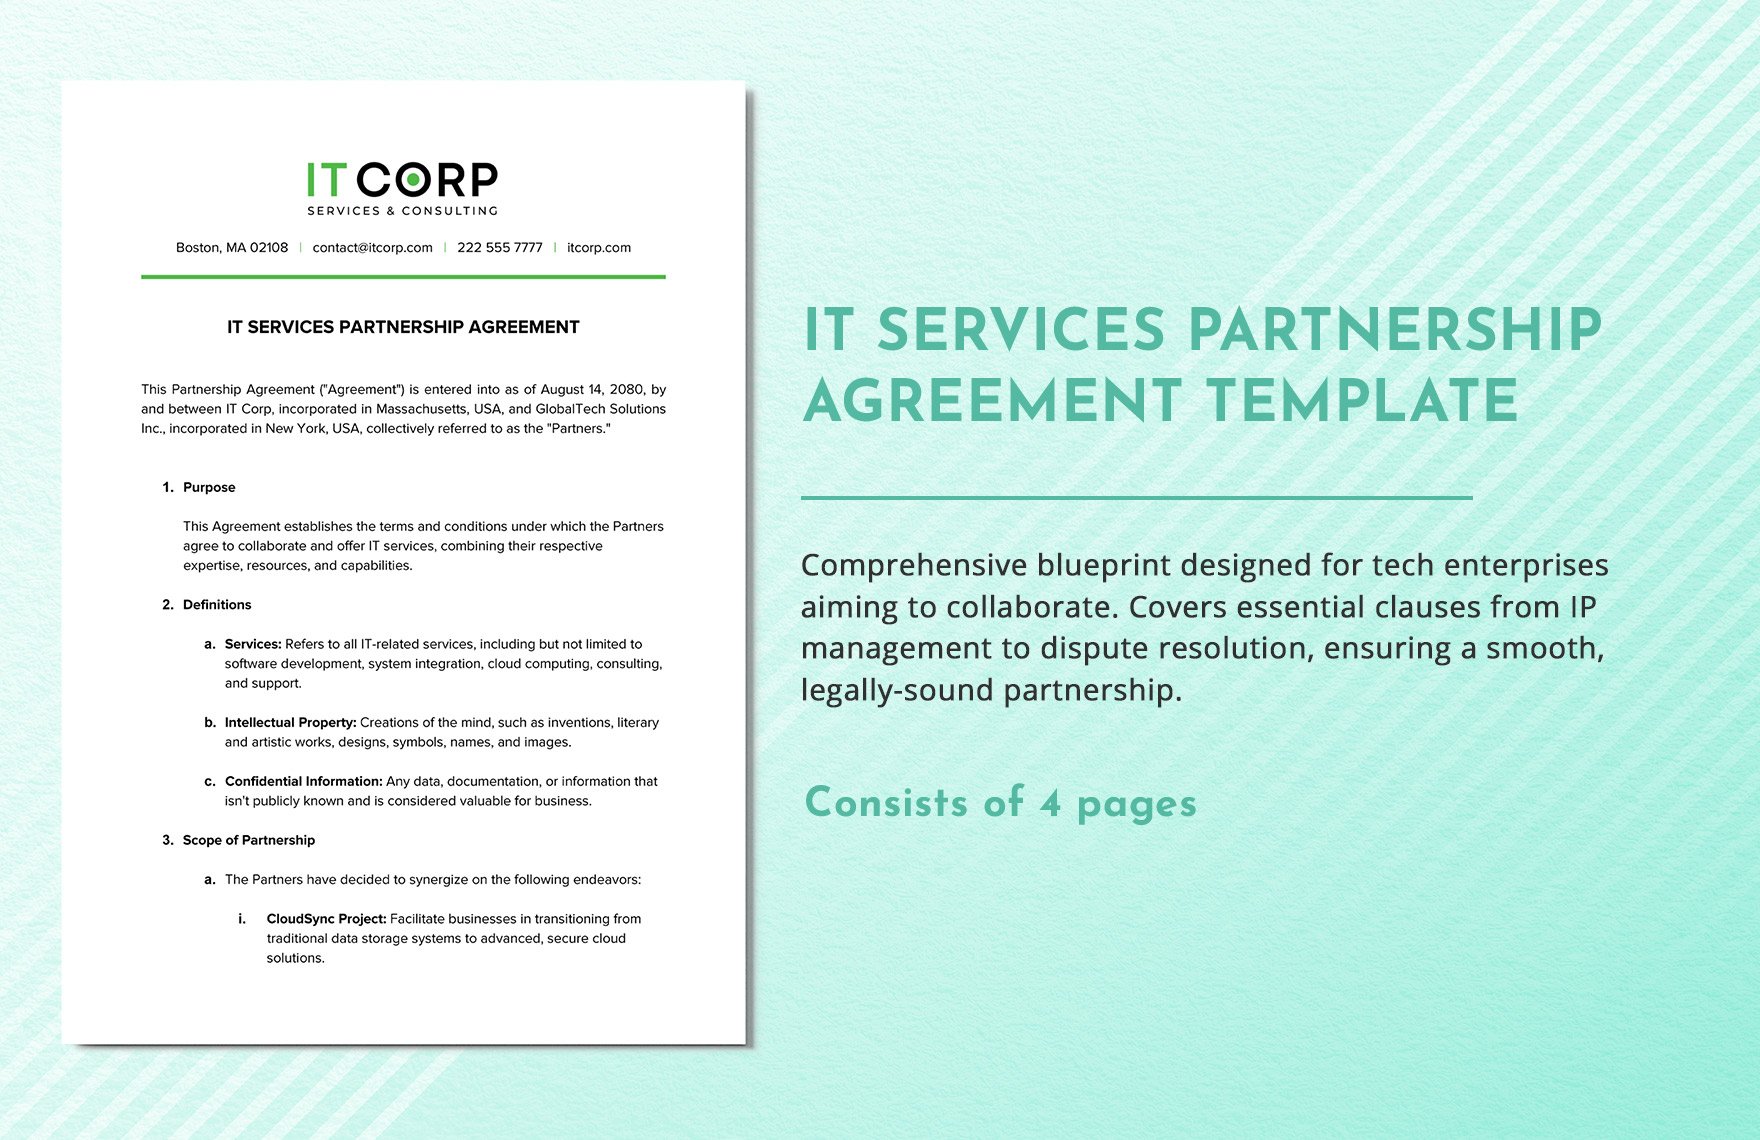 IT Services Partnership Agreement Template